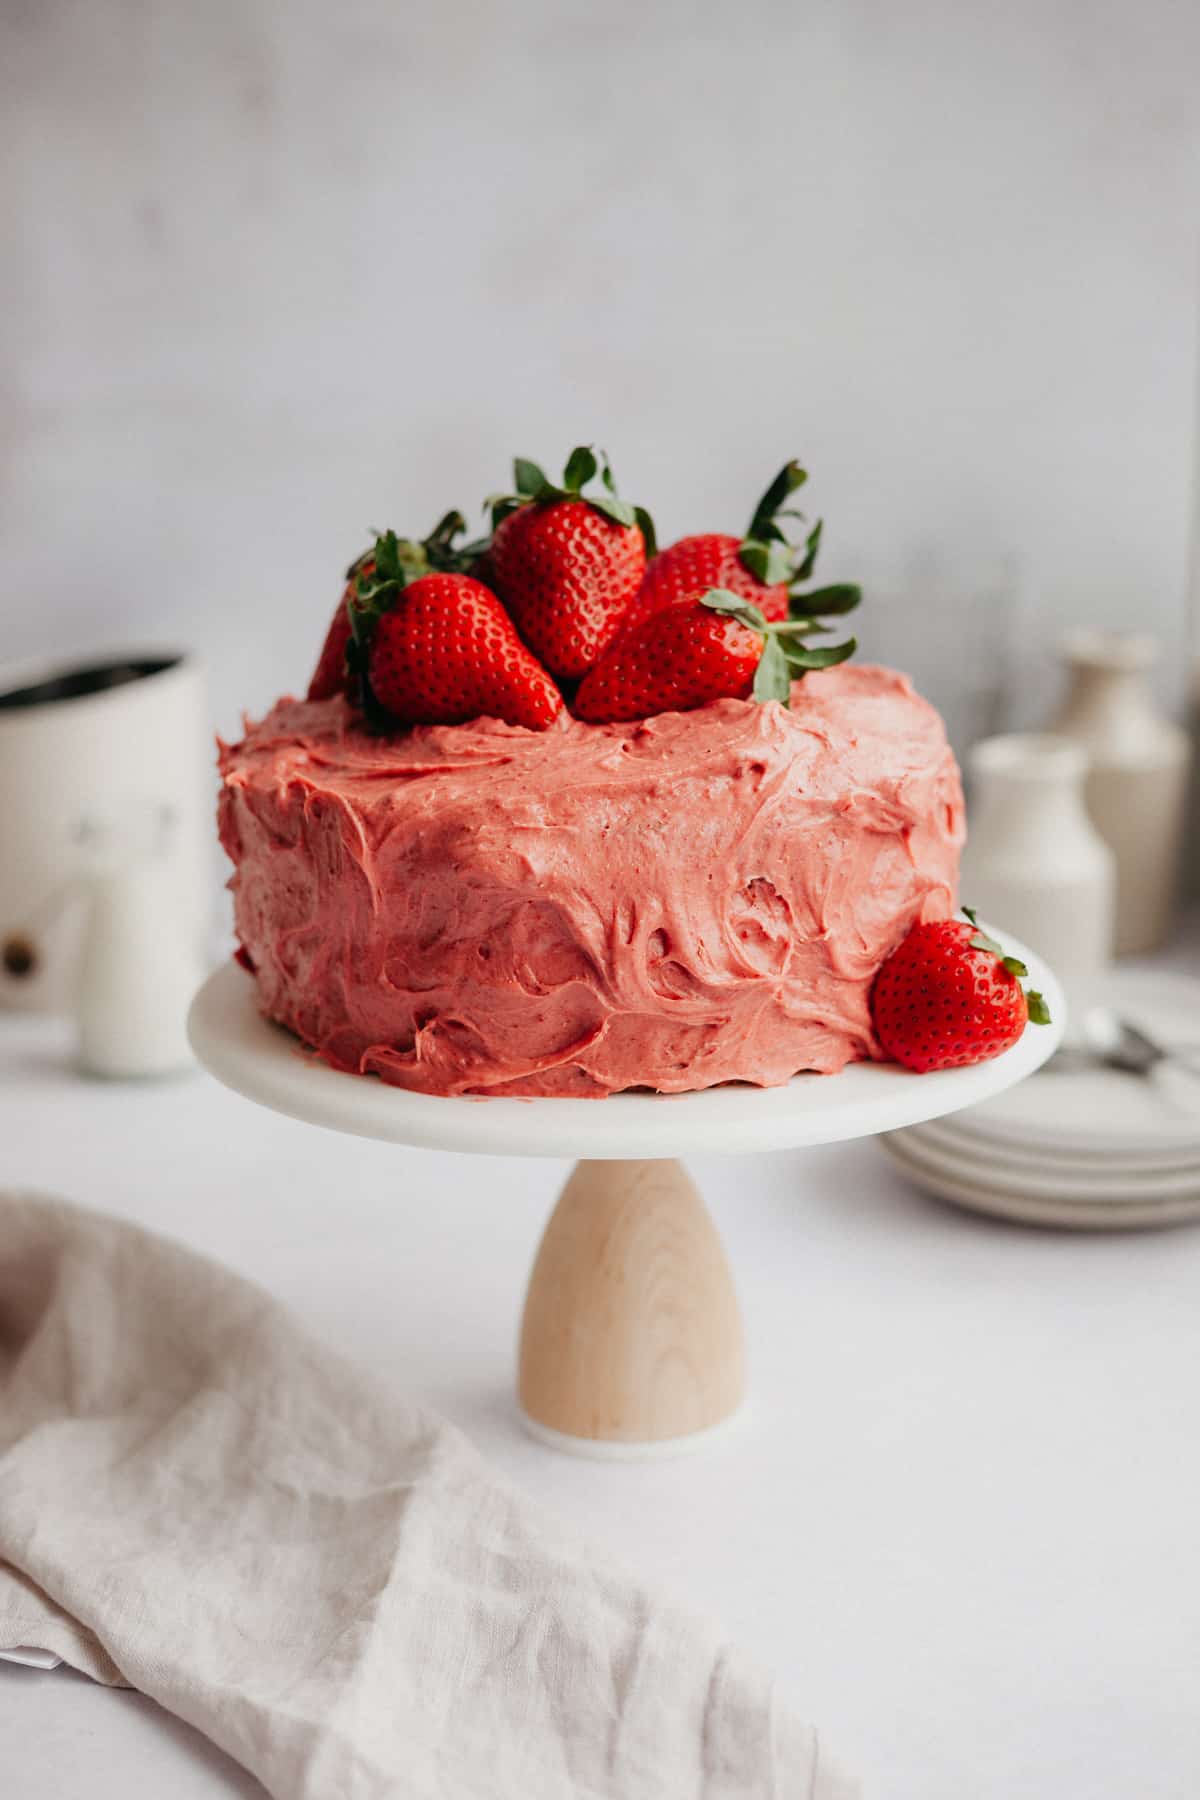 A pink strawberry cake frosted with strawberry frosting on a white cake stand